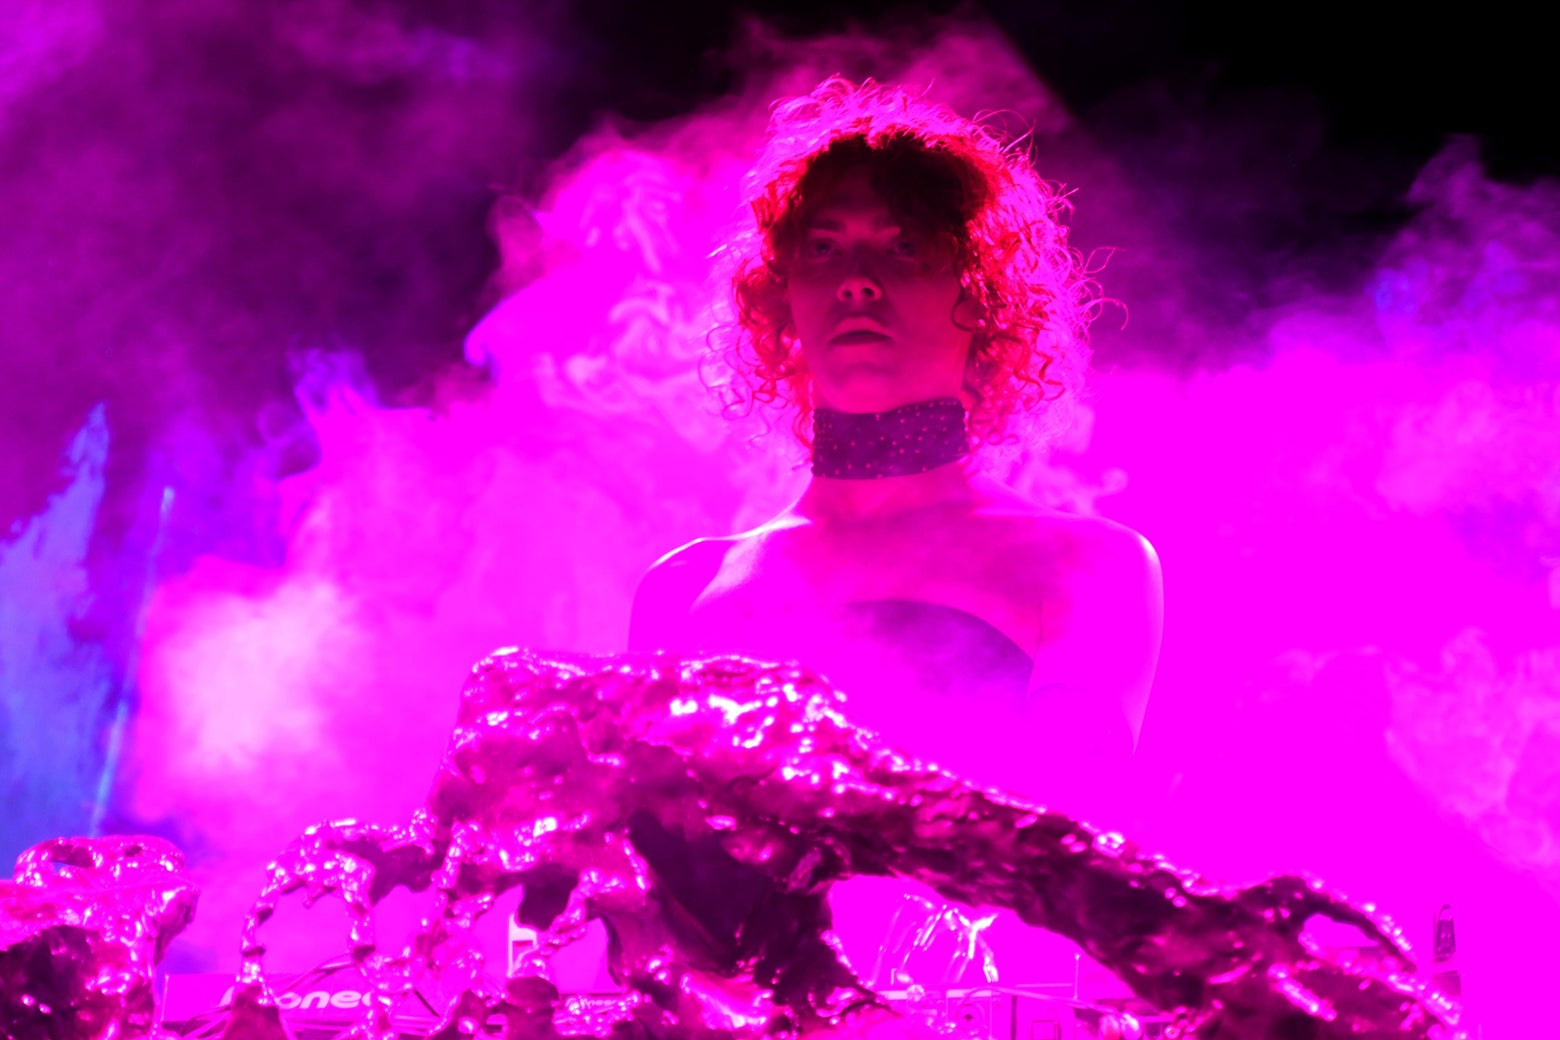 SOPHIE, who died at 34, made daring music that was completely